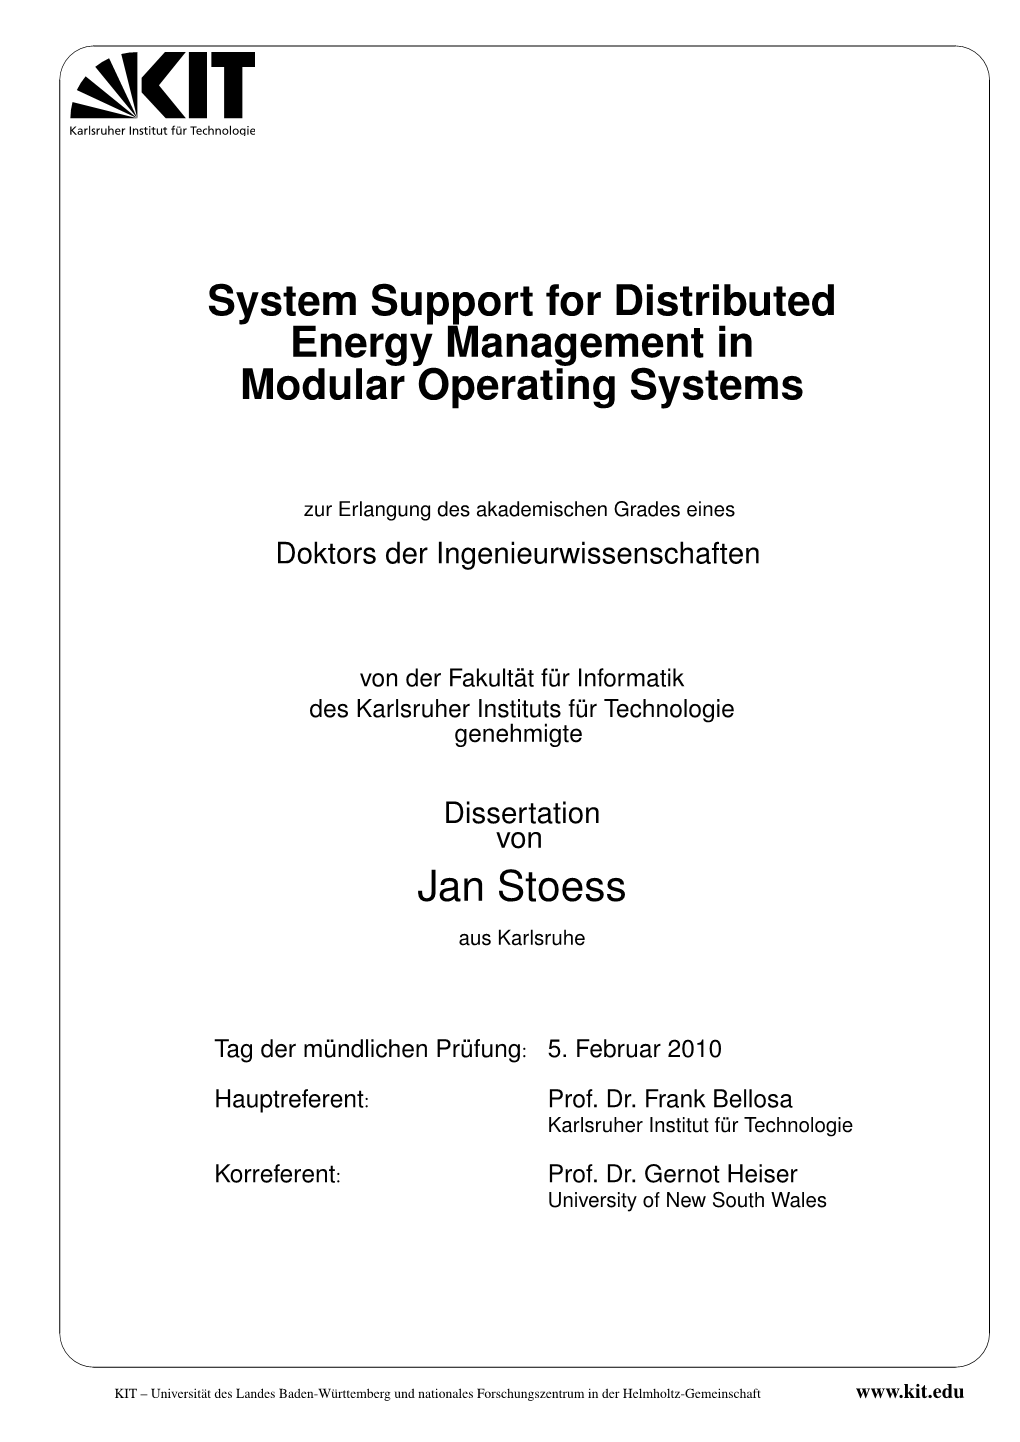 System Support for Distributed Energy Management in Modular Operating Systems